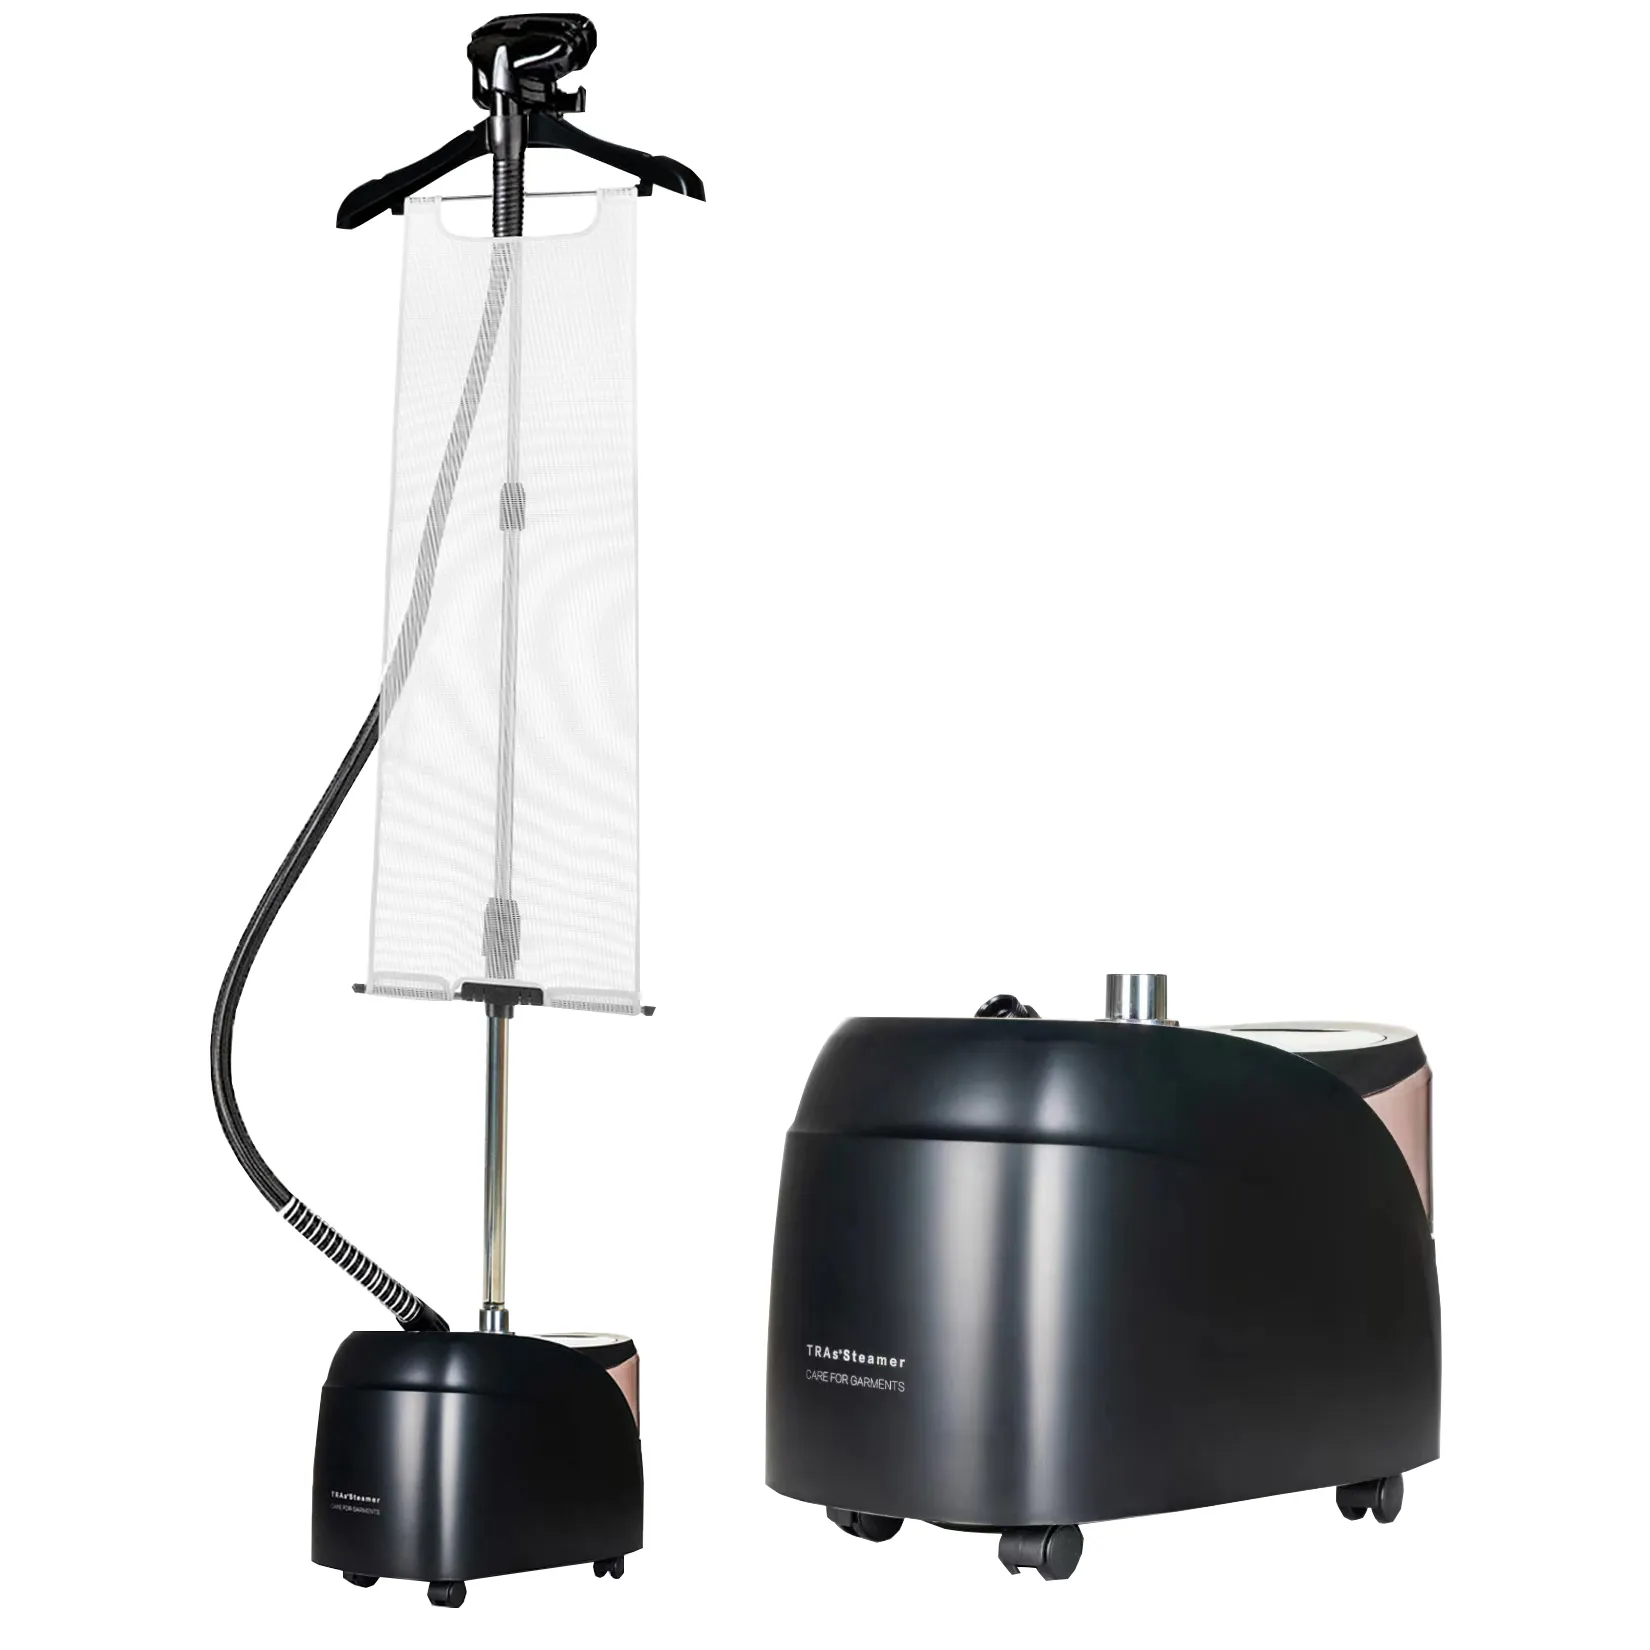 2000w High-quality 3.2L large capacity fast heat up Clothes Vertical Press commercial Garment Steamer